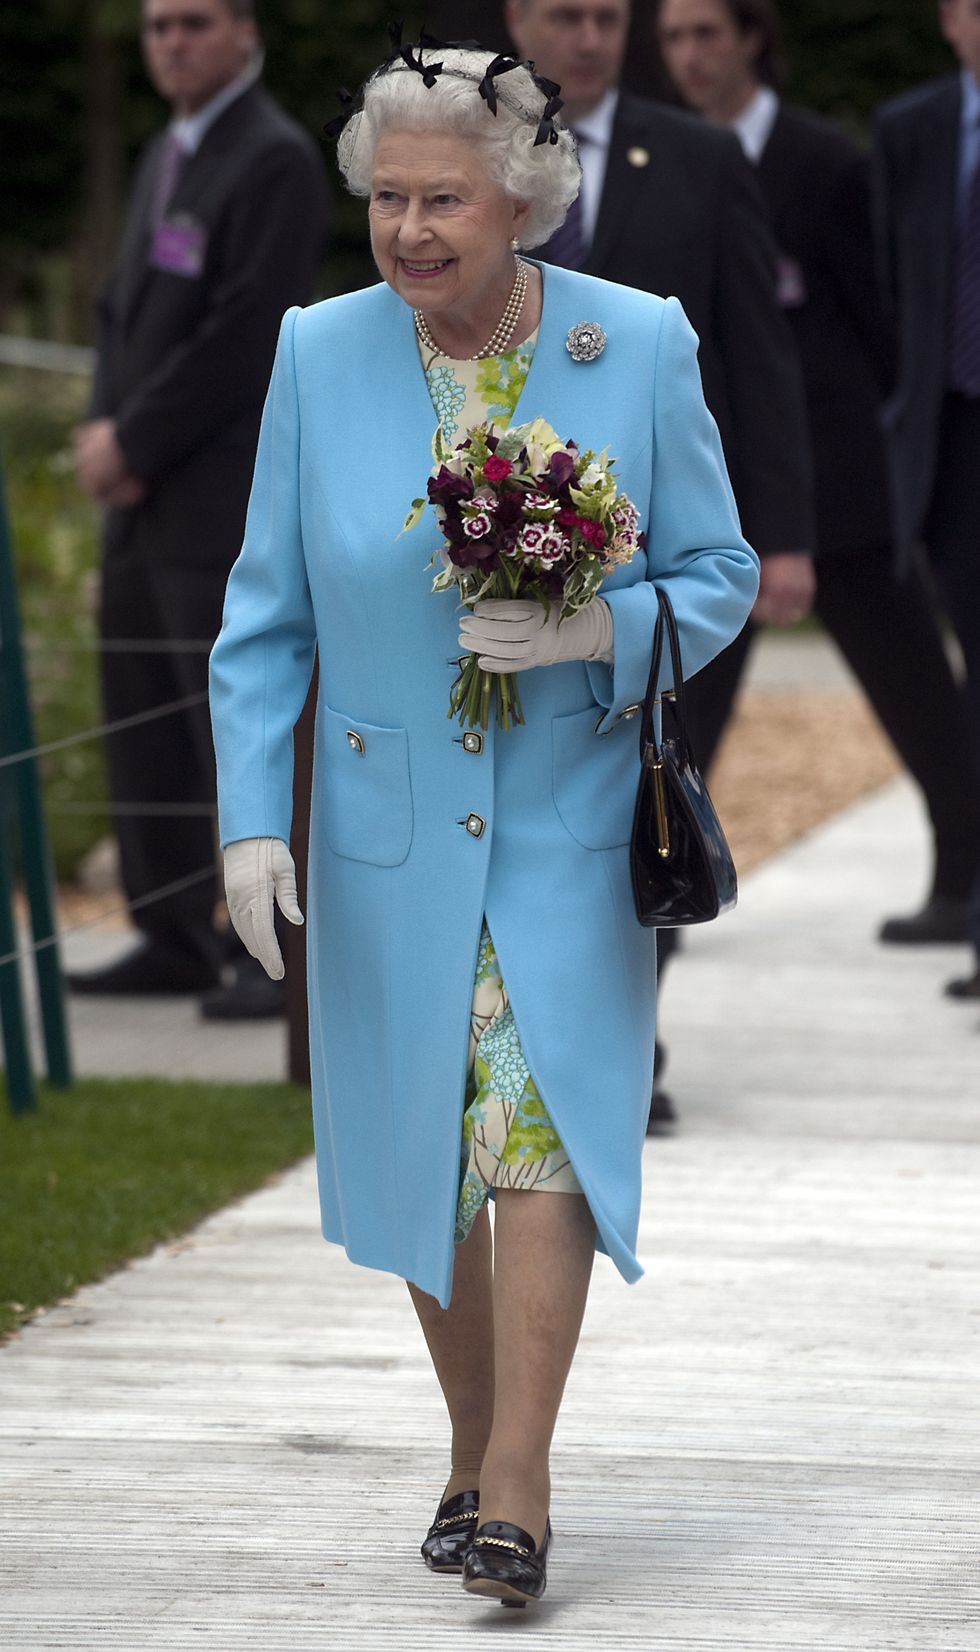 See Queen Elizabeth's Bright Pink Ensemble at Chelsea Flower Show